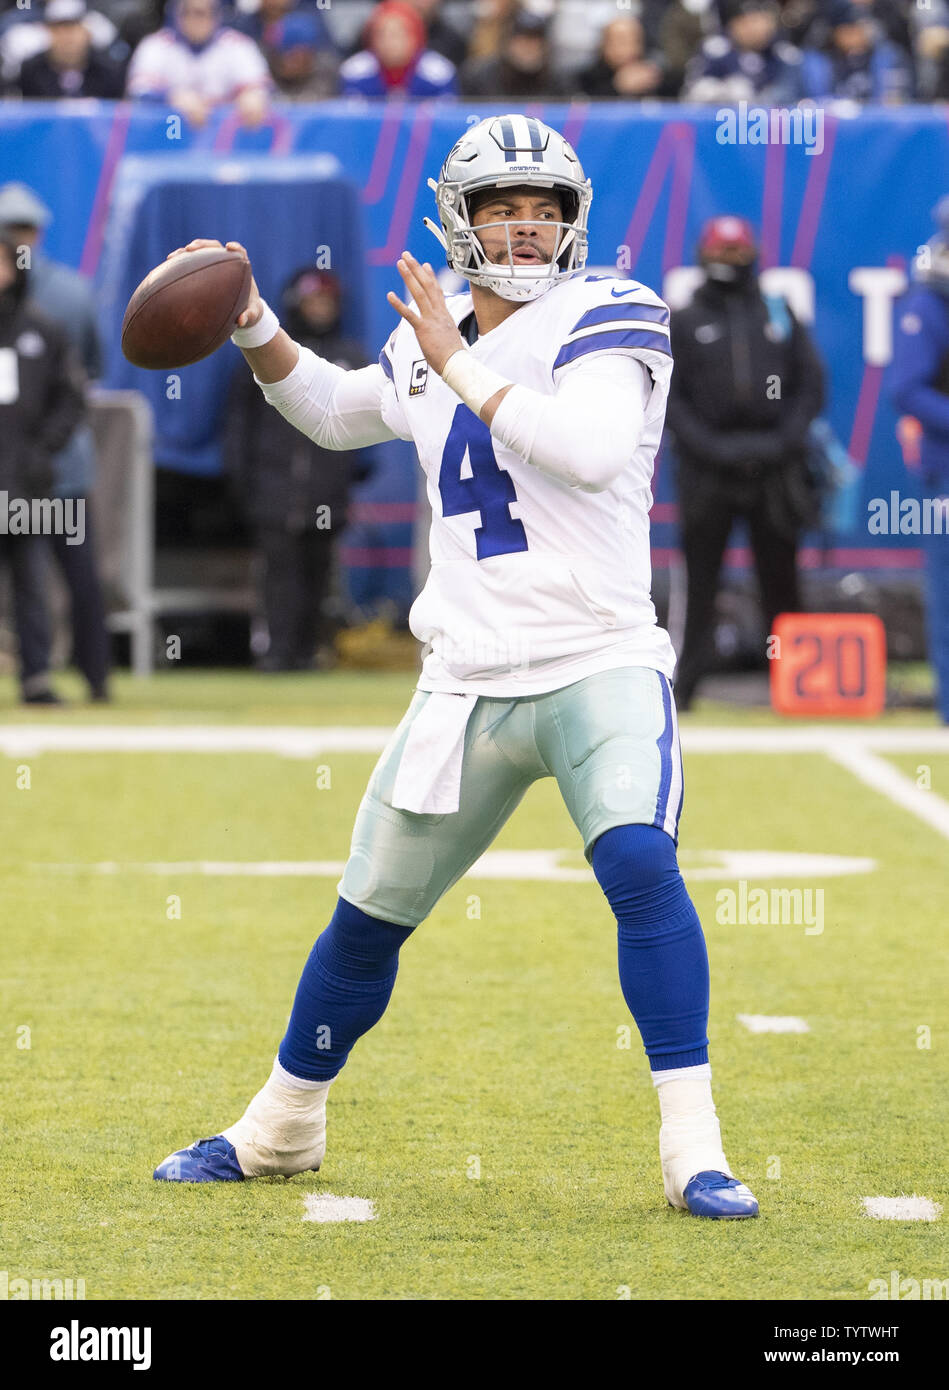 Dallas Cowboys quarterback Dak Prescott throws a pass in the third quarter  against the New York Giants in week 17 of the NFL season at MetLife Stadium  in East Rutherford, New Jersey